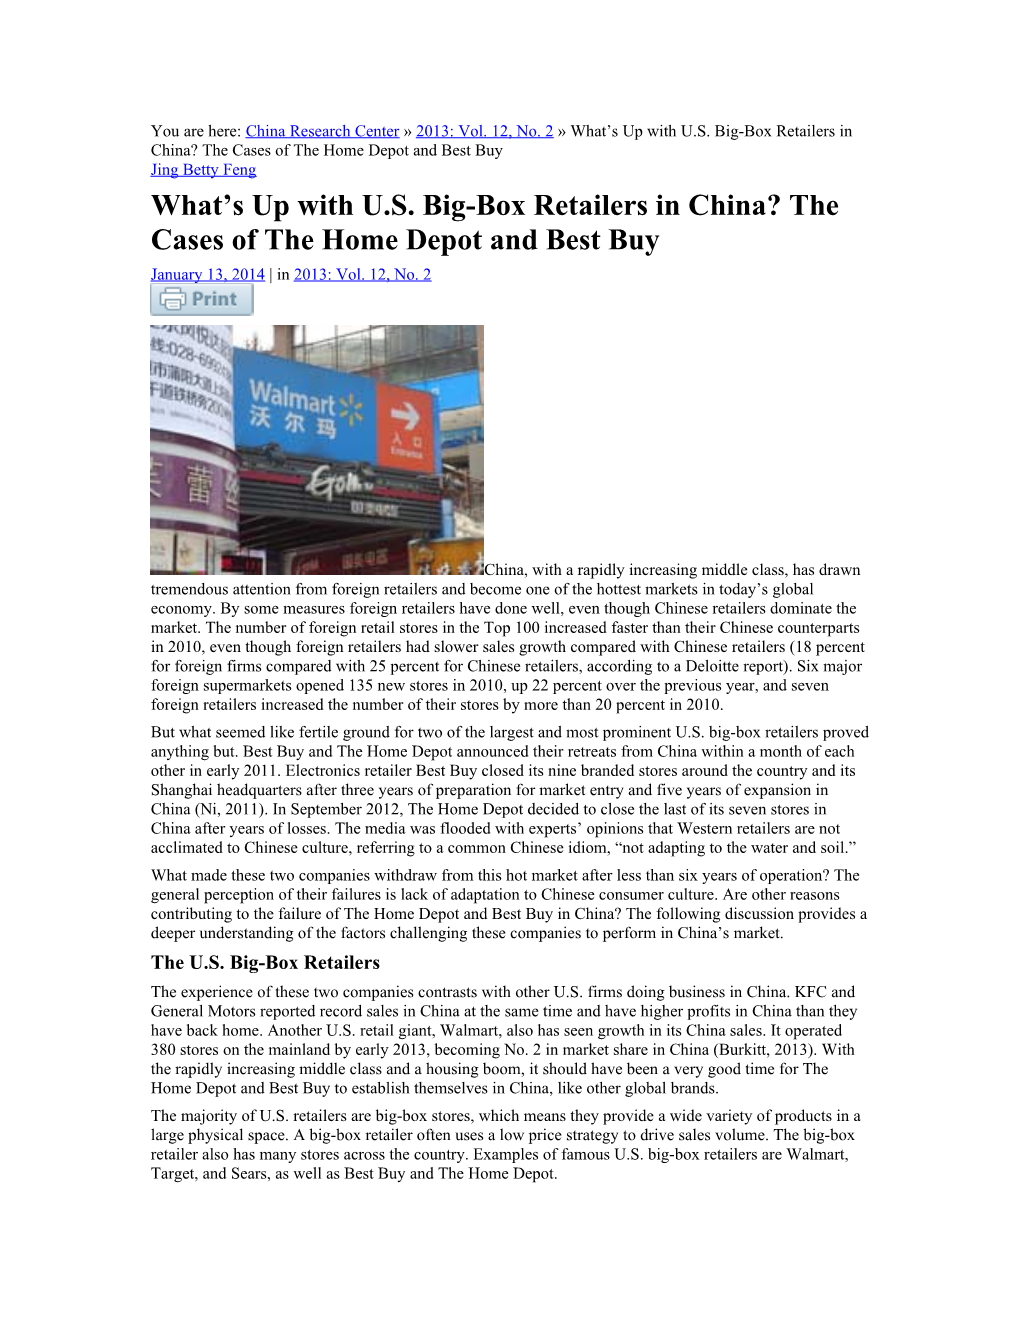 What S up with U.S. Big-Box Retailers in China? the Cases of the Home Depot and Best Buy